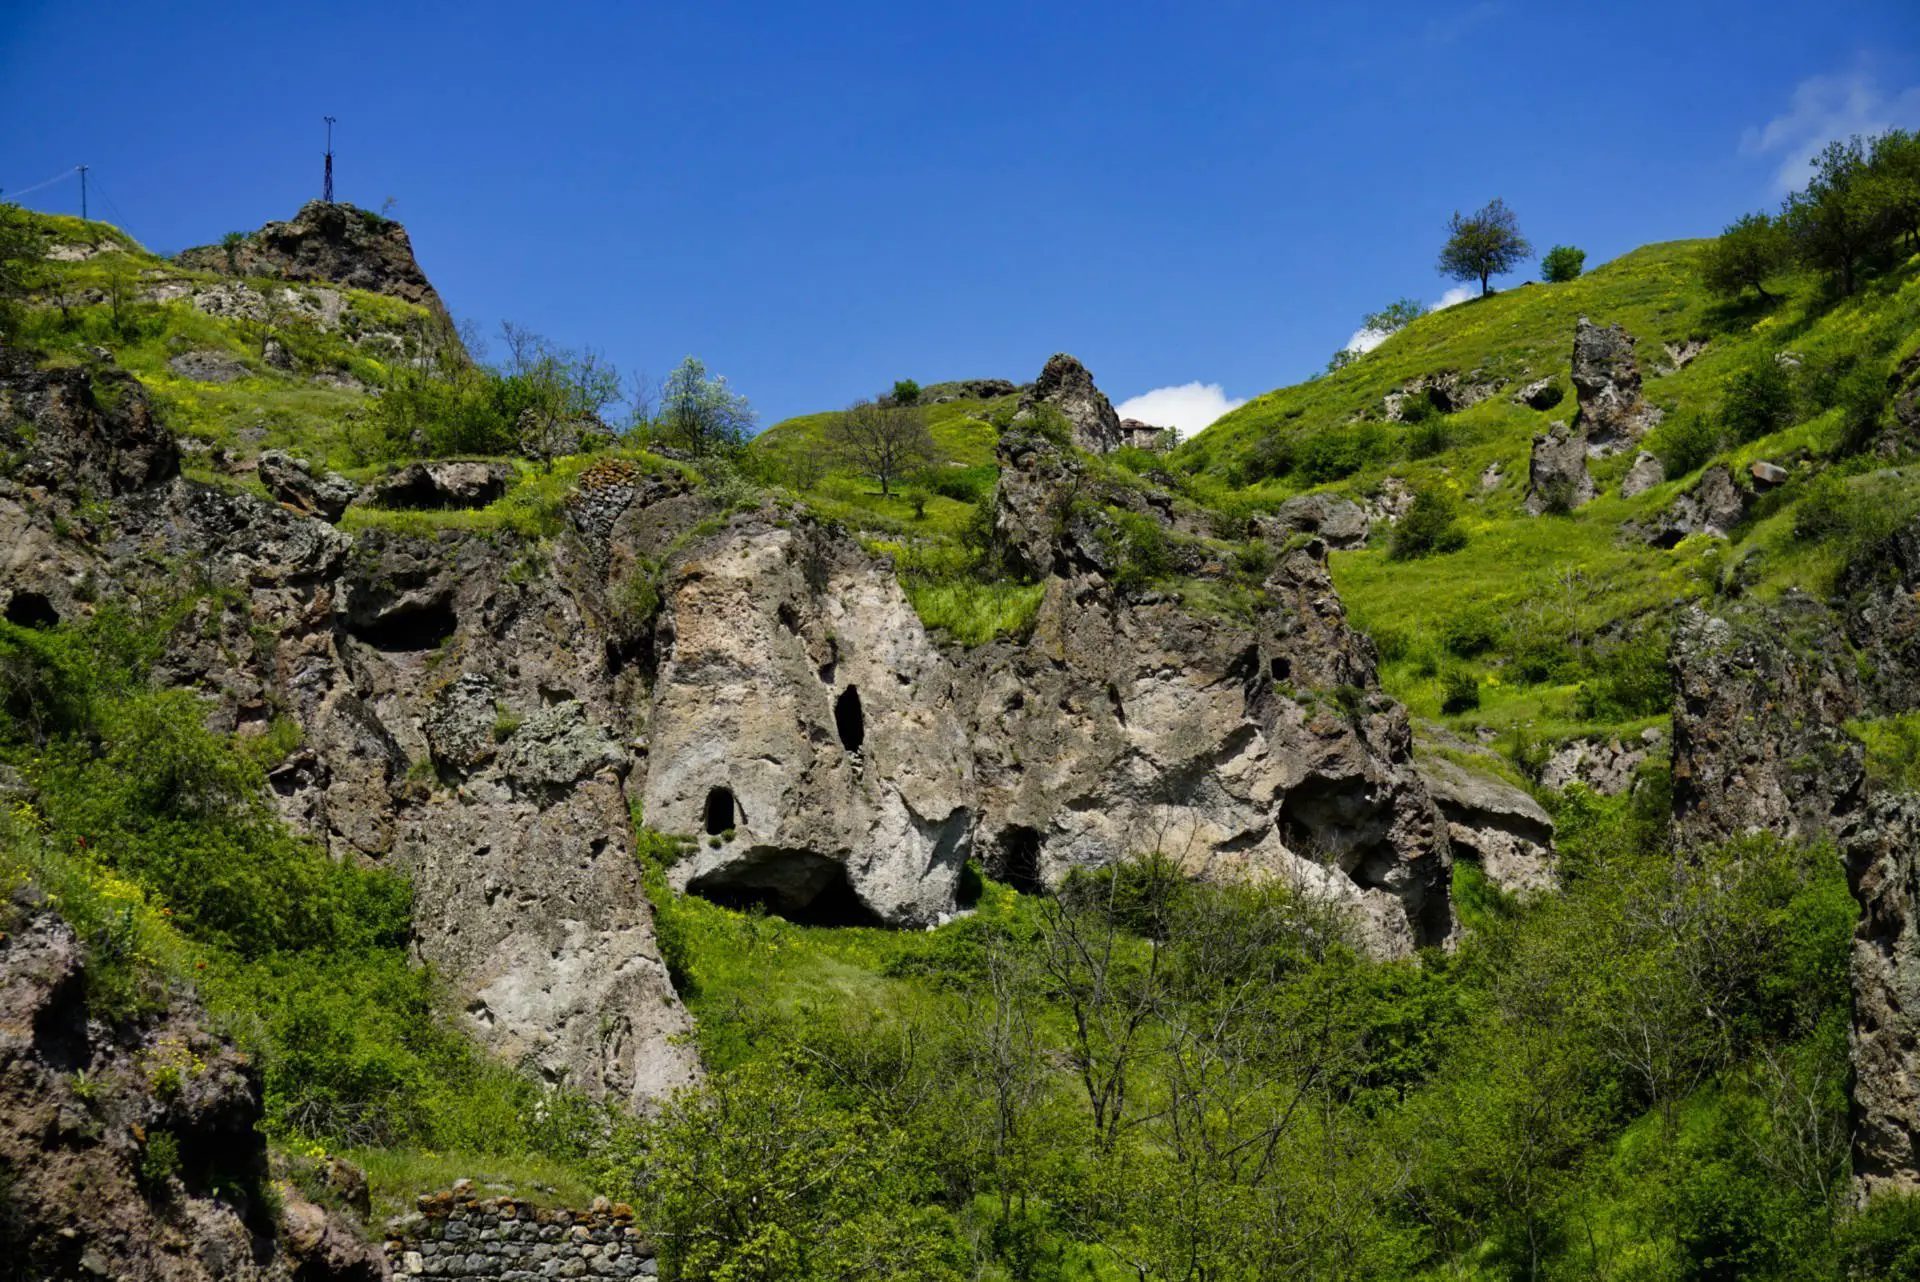 Old Khndzoresk cave village, Armenia - Experiencing the Globe